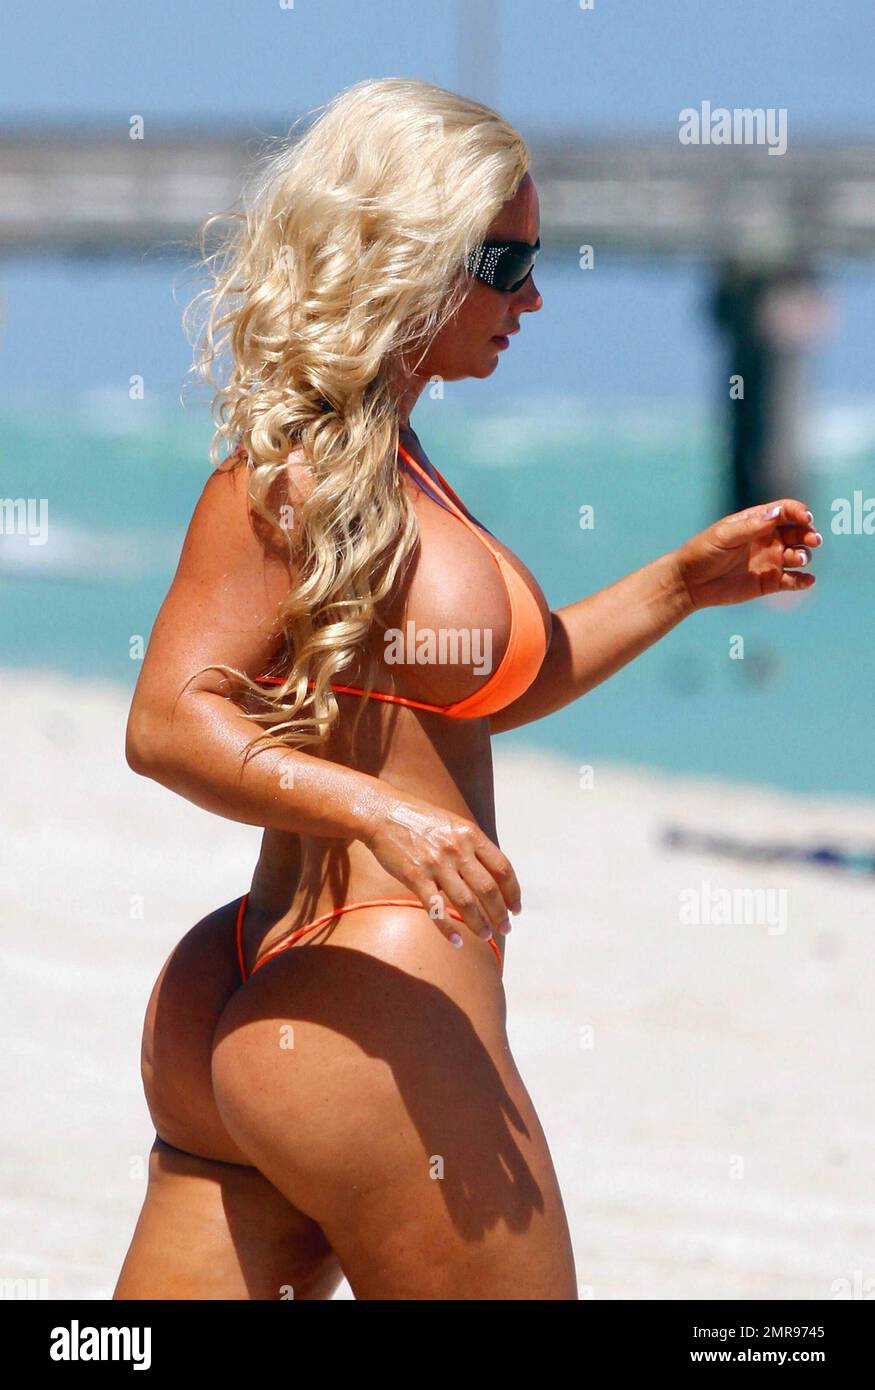 Actor and rapper Ice-T relaxes on Miamis South Beach with wife Coco, who wore a very revealing bright orange string bikini hq image